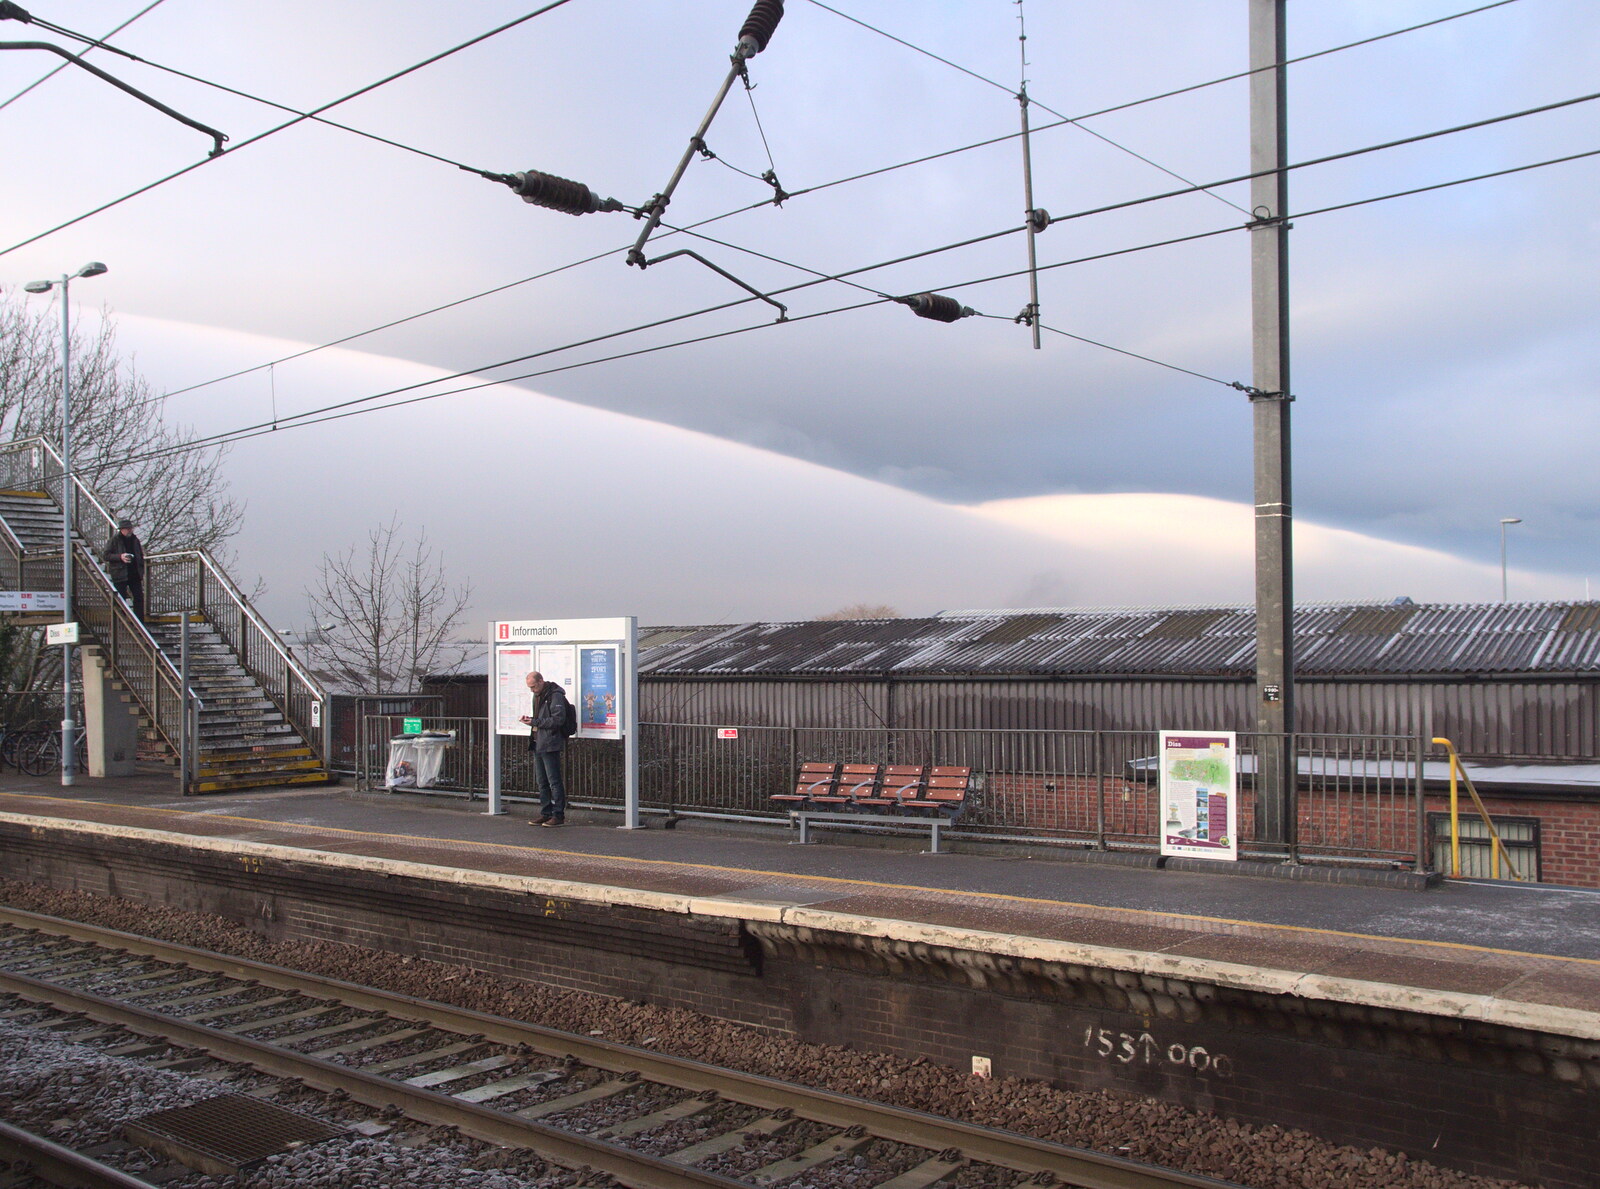 February Cactus Randomness, London and Brome, Suffolk - 14th February 2016: A weird cloud front moves over Diss Station